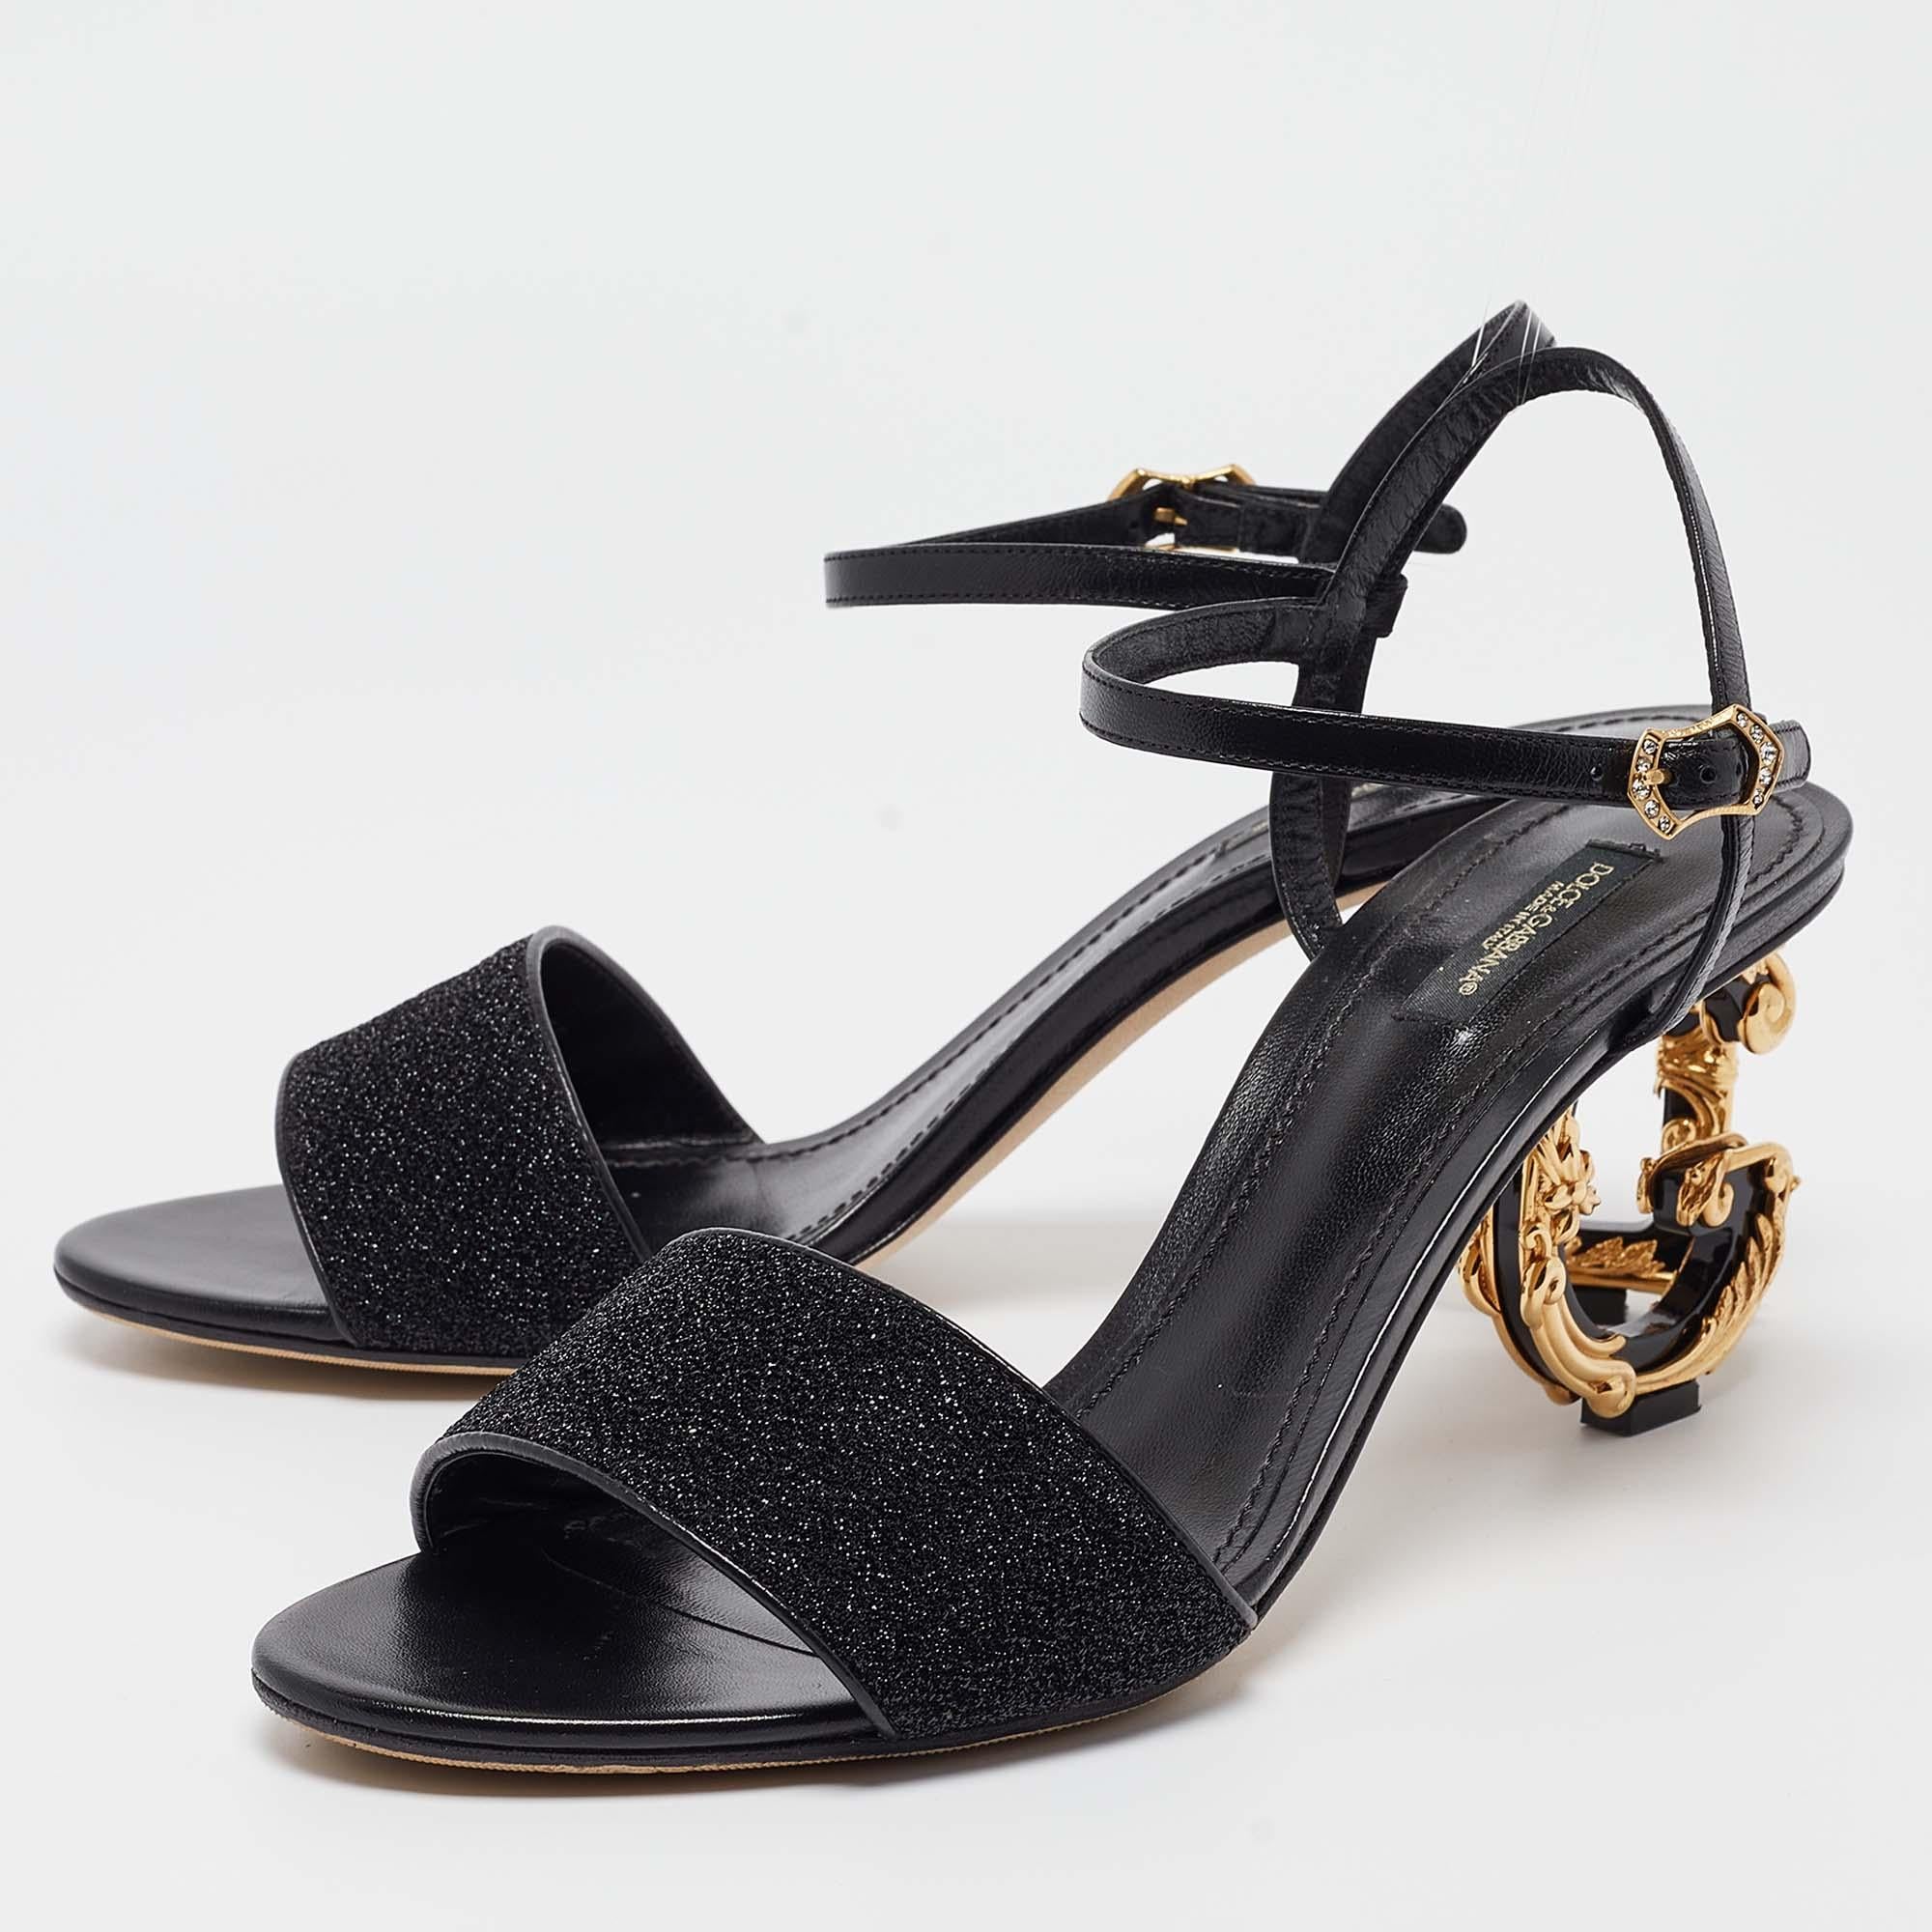 These gorgeous sandals from Dolce & Gabbana will add sparks of luxury to your wardrobe! The black sandals have leather straps, buckle closure, and high heels shaped in the iconic brand letters D and G.

Includes: Original Box, Info Booklet